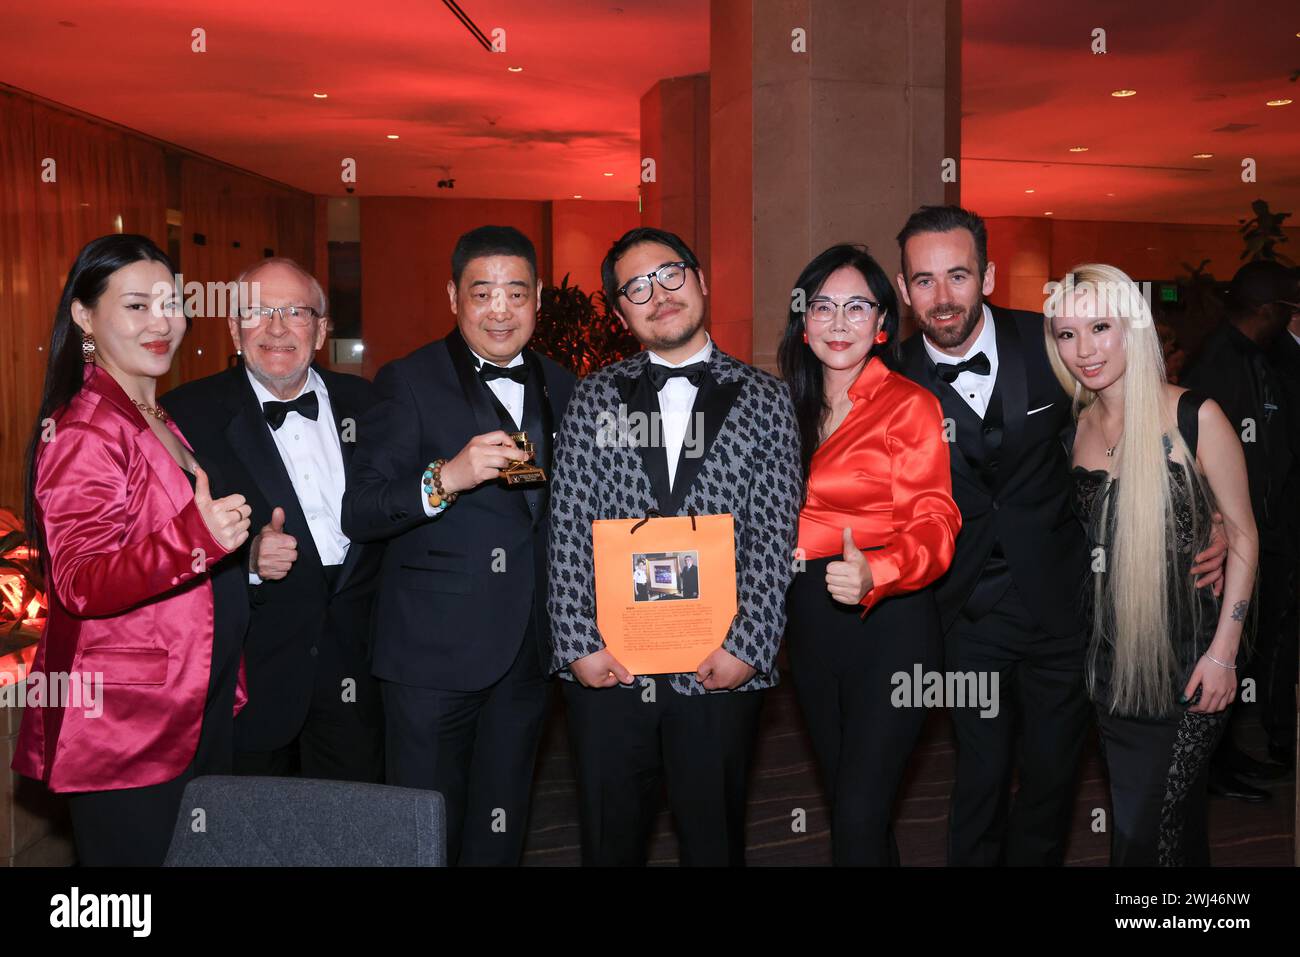 Beverly Hills, California, USA. 10th February, 2024. Actress/producer Rachel Liu Yue, director/filmmaker, Harrison Engle, TV host/founder of Los Angeles Beverly Arts (LABA), Joey Zhou, DGA awarding-director Daniel Kwan (co-director of 'Everything Everywhere All at Once') with gift from LABA Blue-chip artist Jiannan Huang, director Maria Meimei Yue, Maxwell Gobbell, and Nicolette Anqi Xiang attending the 76th Annual Directors Guild of America Awards at the Beverly Hilton Hotel in Beverly Hills, California. Credit: Sheri Determan Stock Photo